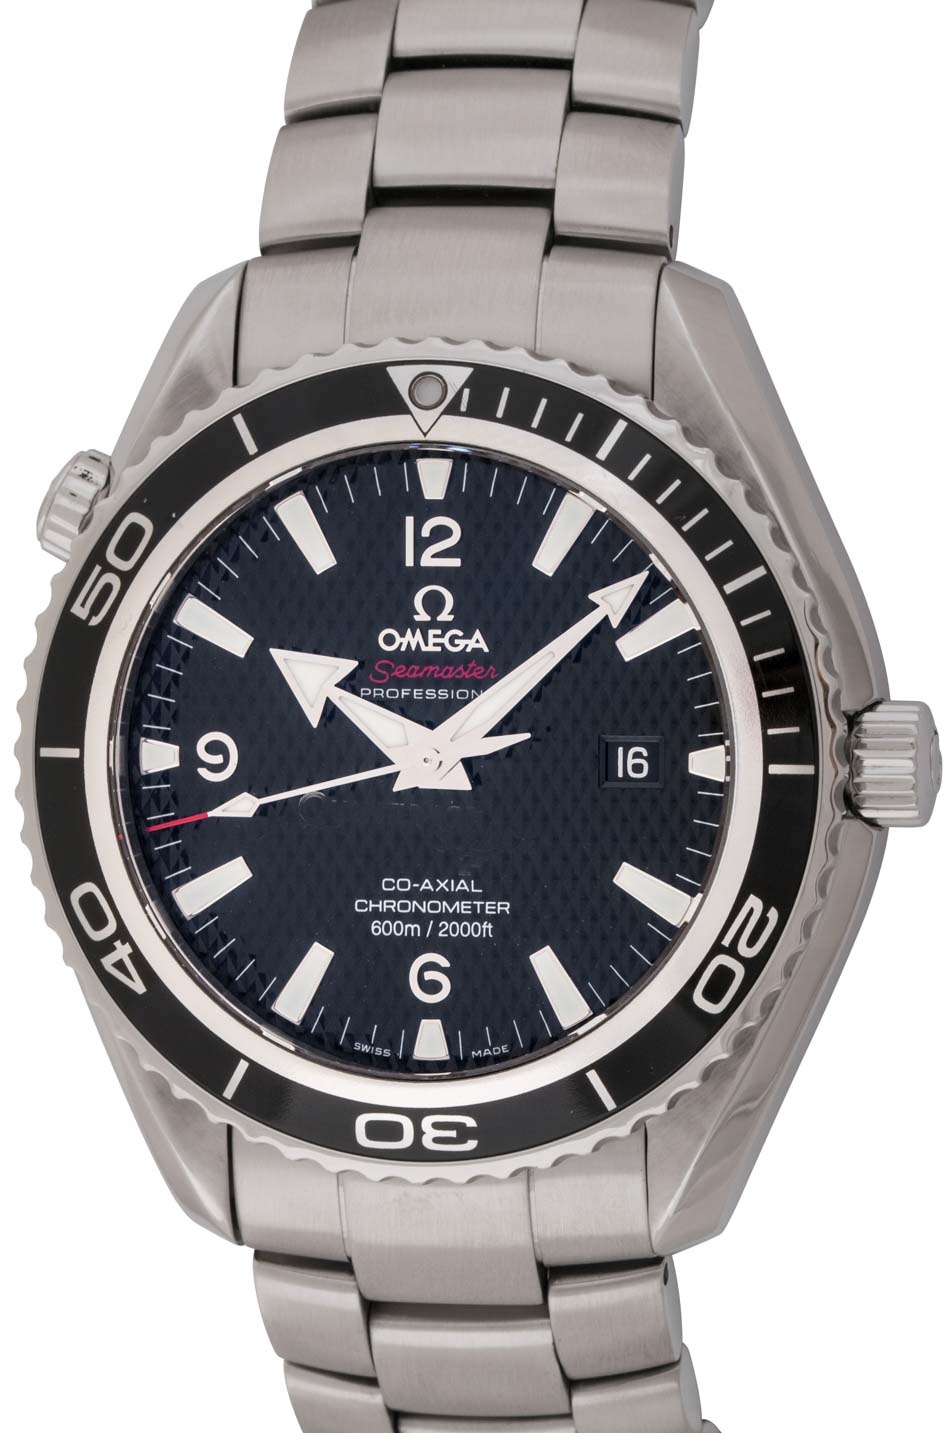 Omega - Seamaster Planet Ocean XL 'Quantum of Solace' Limited Edition